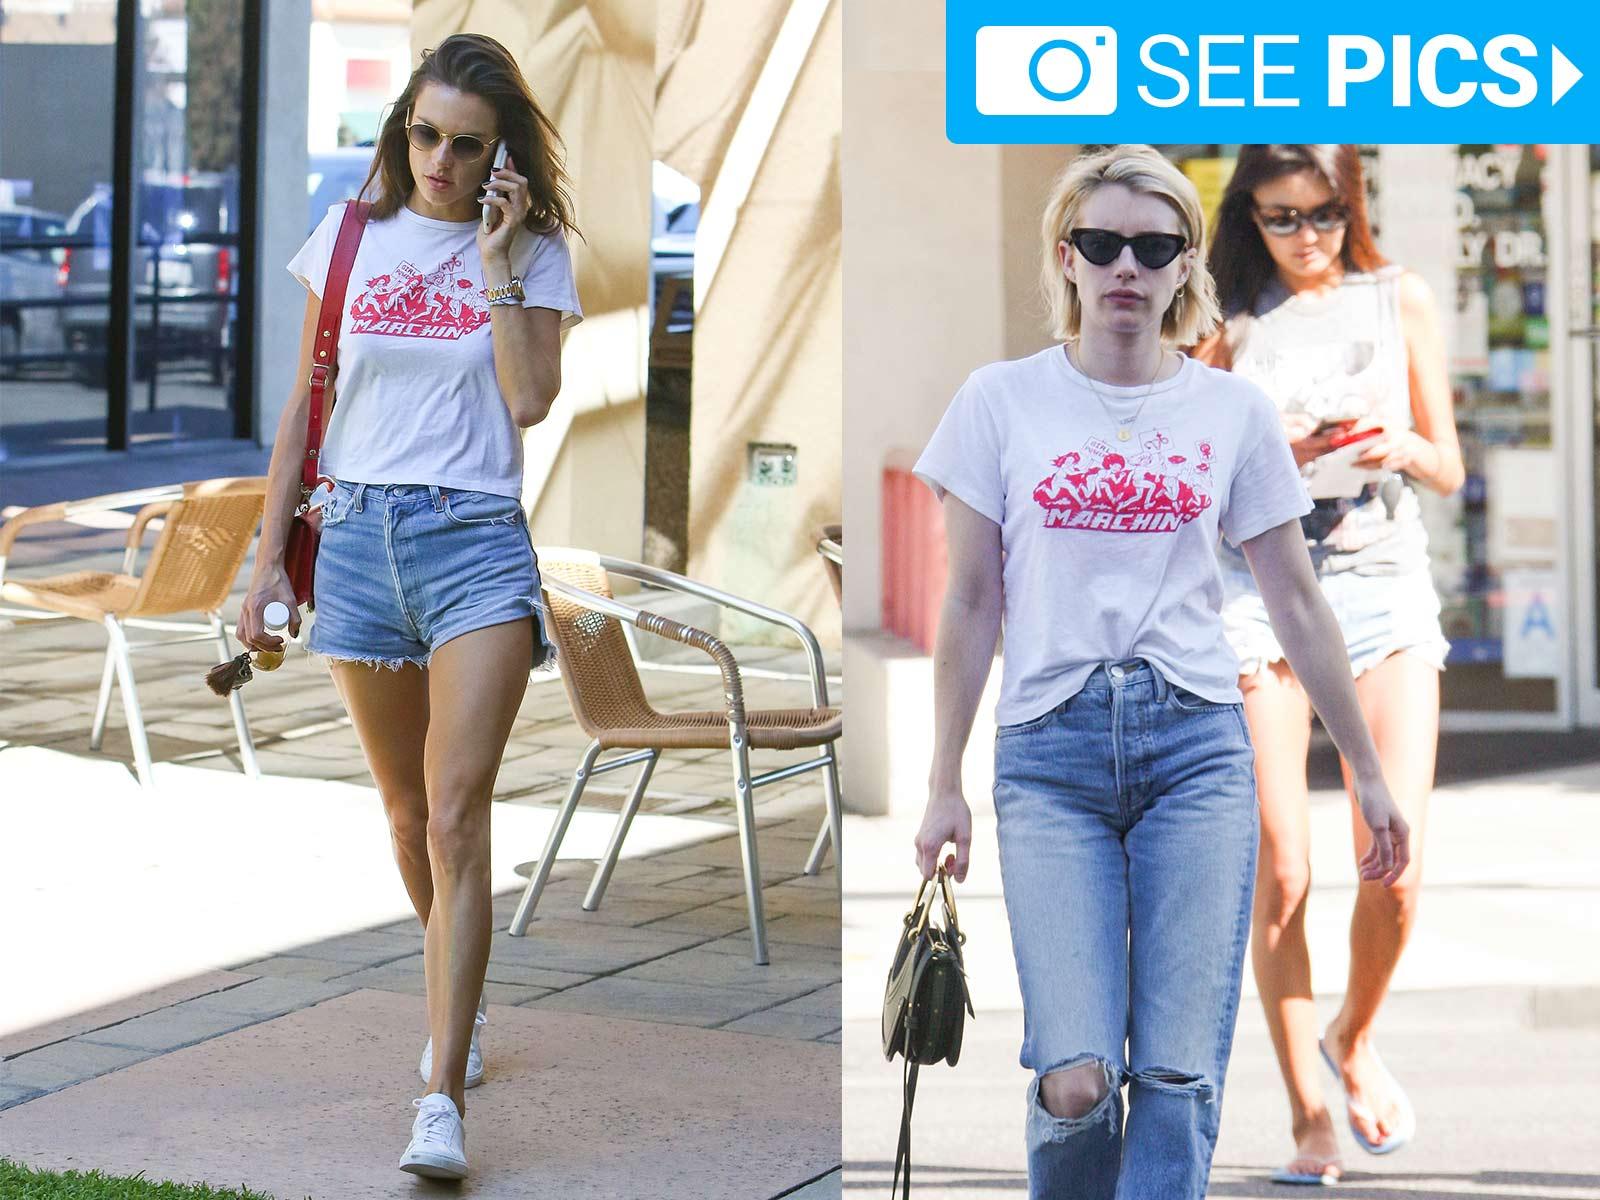 Emma Roberts and Alessandra Ambrosio ‘Marchin’ in Matching Tees